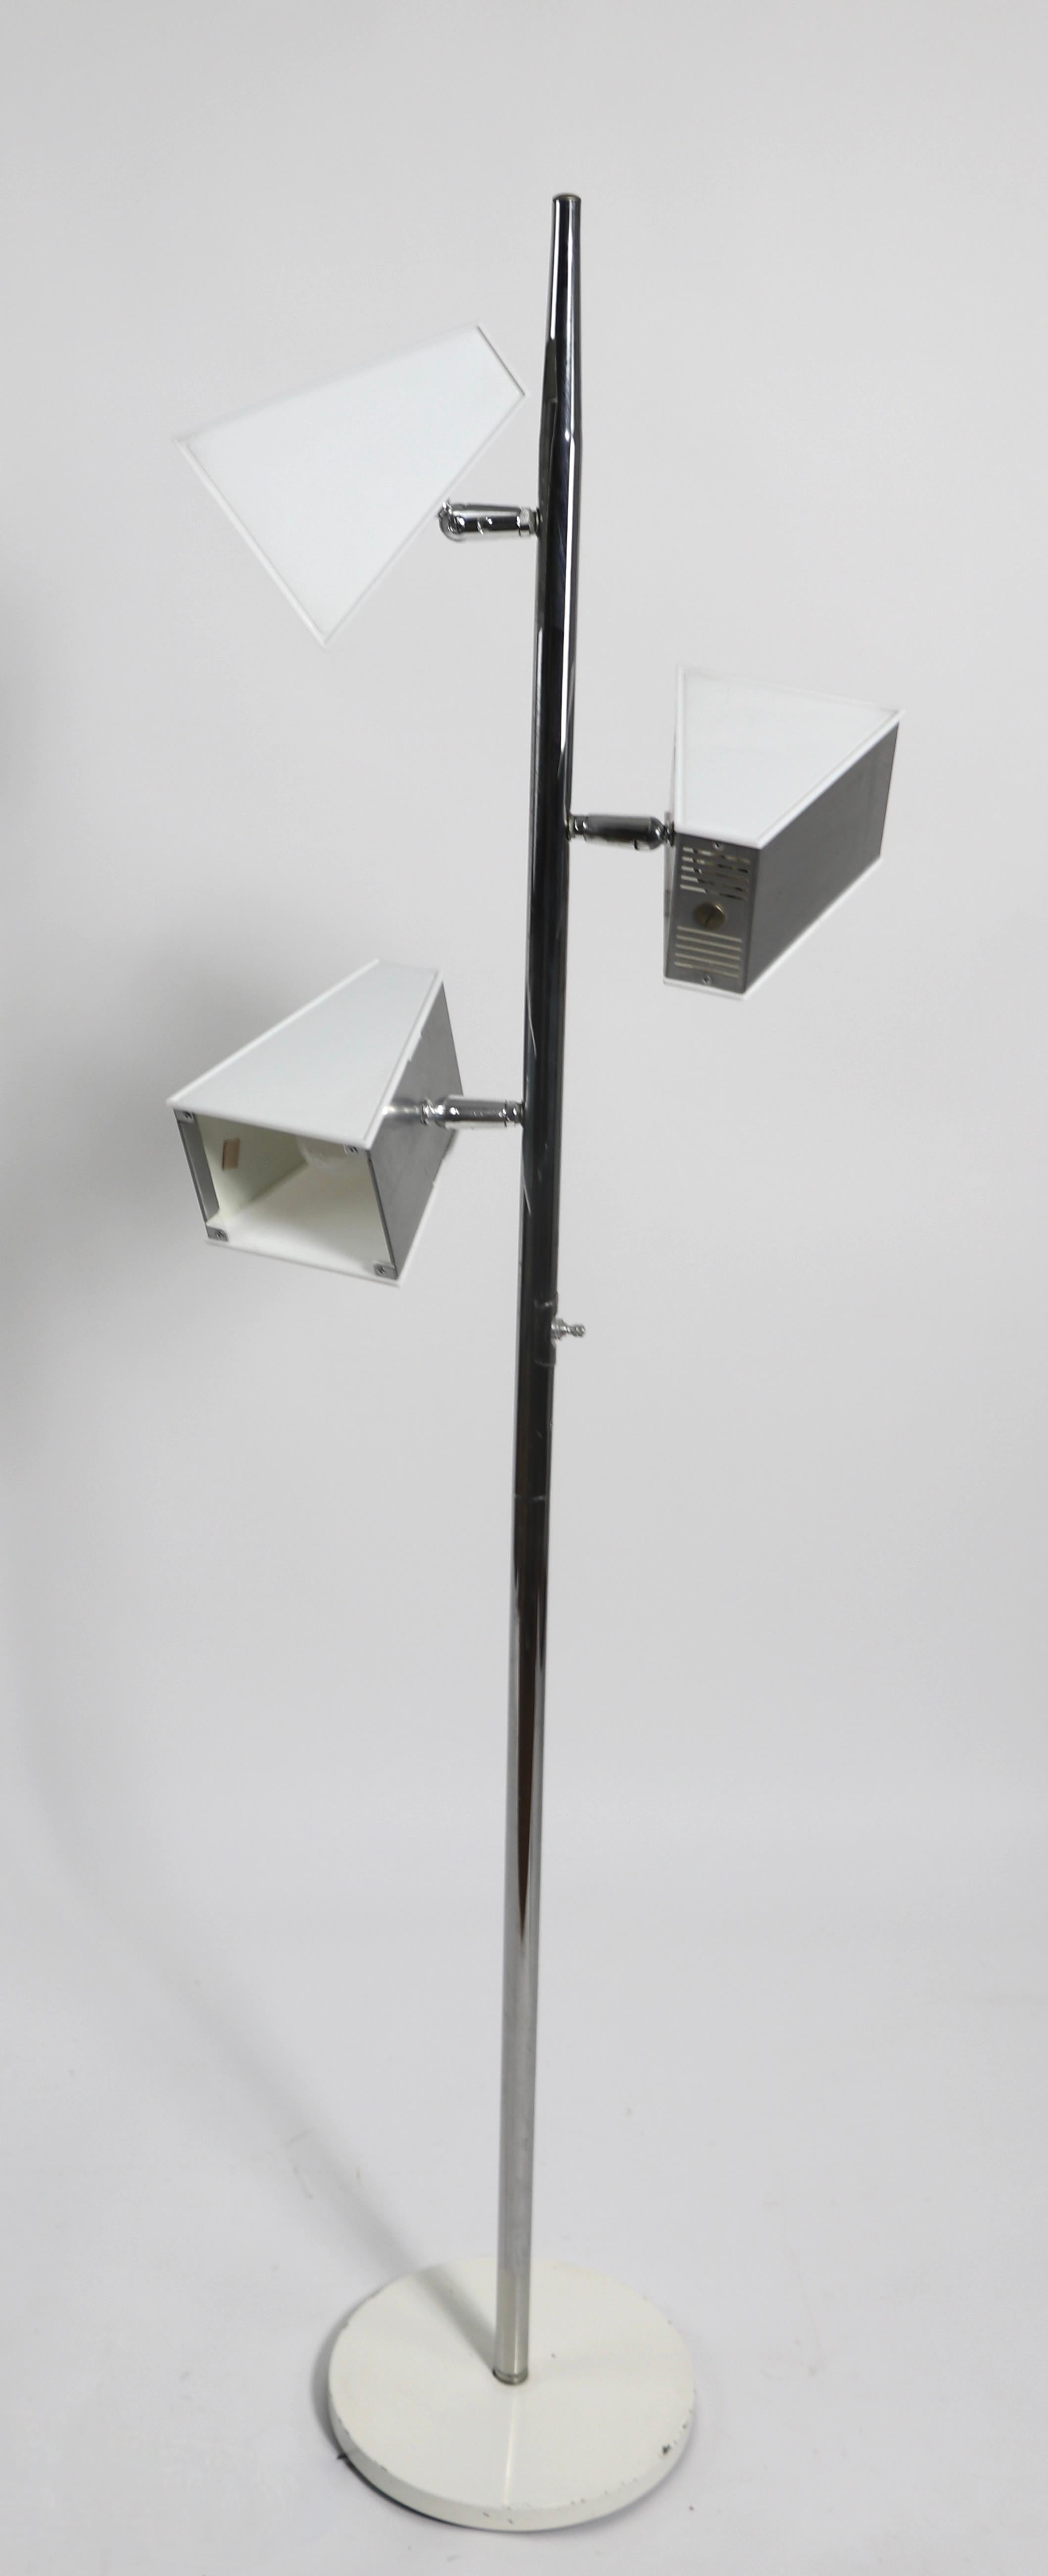 Three light pole lamp having triangular shades, of translucent white lucite and brushed steel mounted on a bright chrome pole. Each shade measures 7 D x 5.5 W x 4.25 H inches - and is adjustable in position to direct the light. The lamp features a